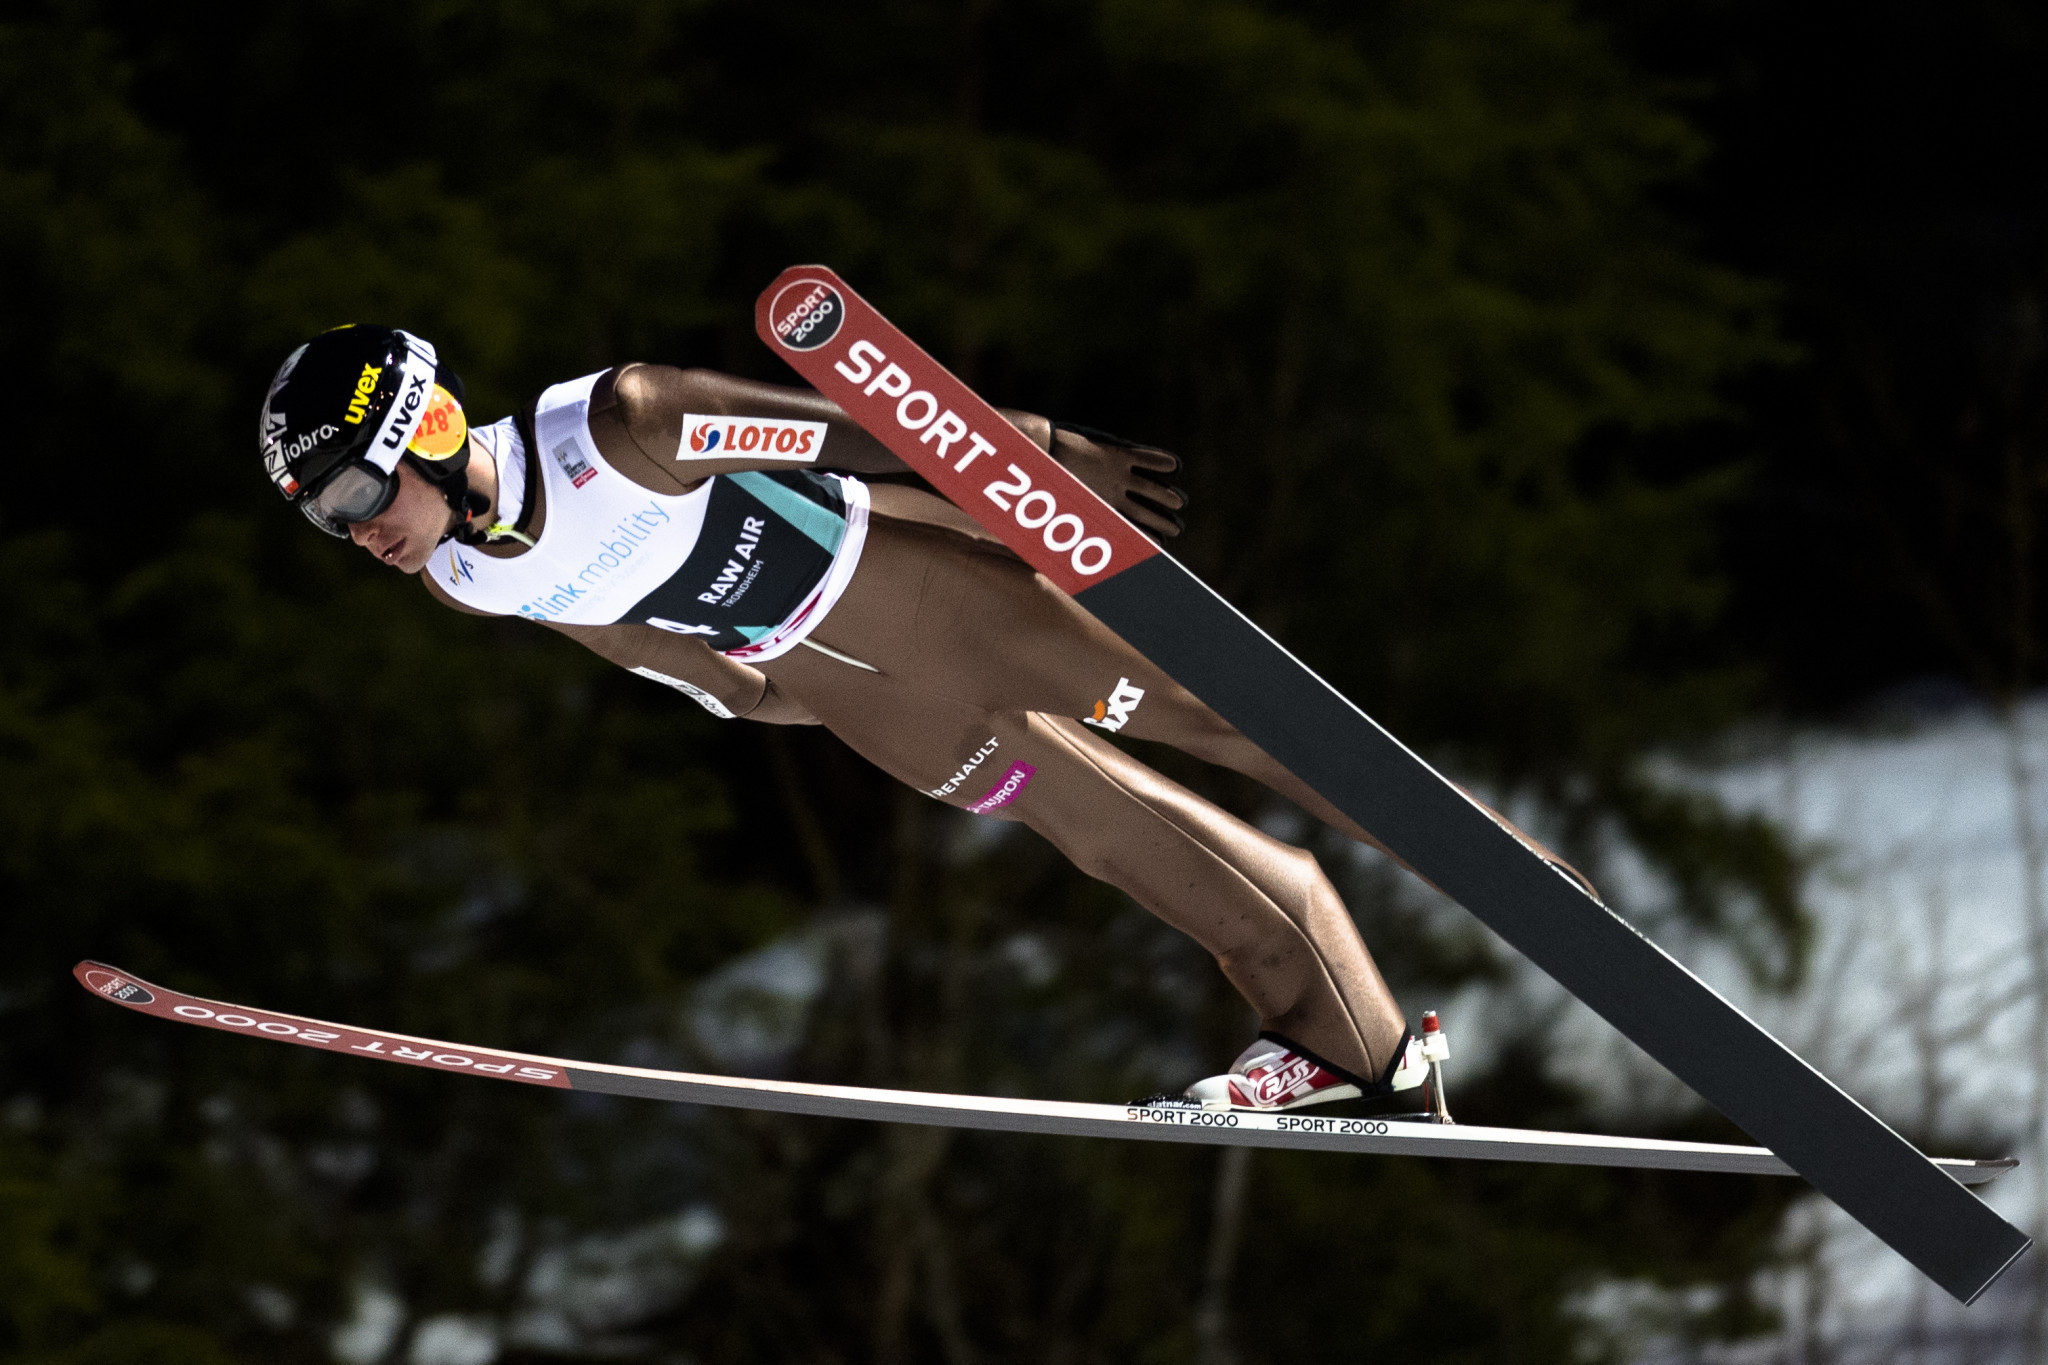 Polish ski jumper Jan Ziobro has opted to "suspend" his career ©Getty Images